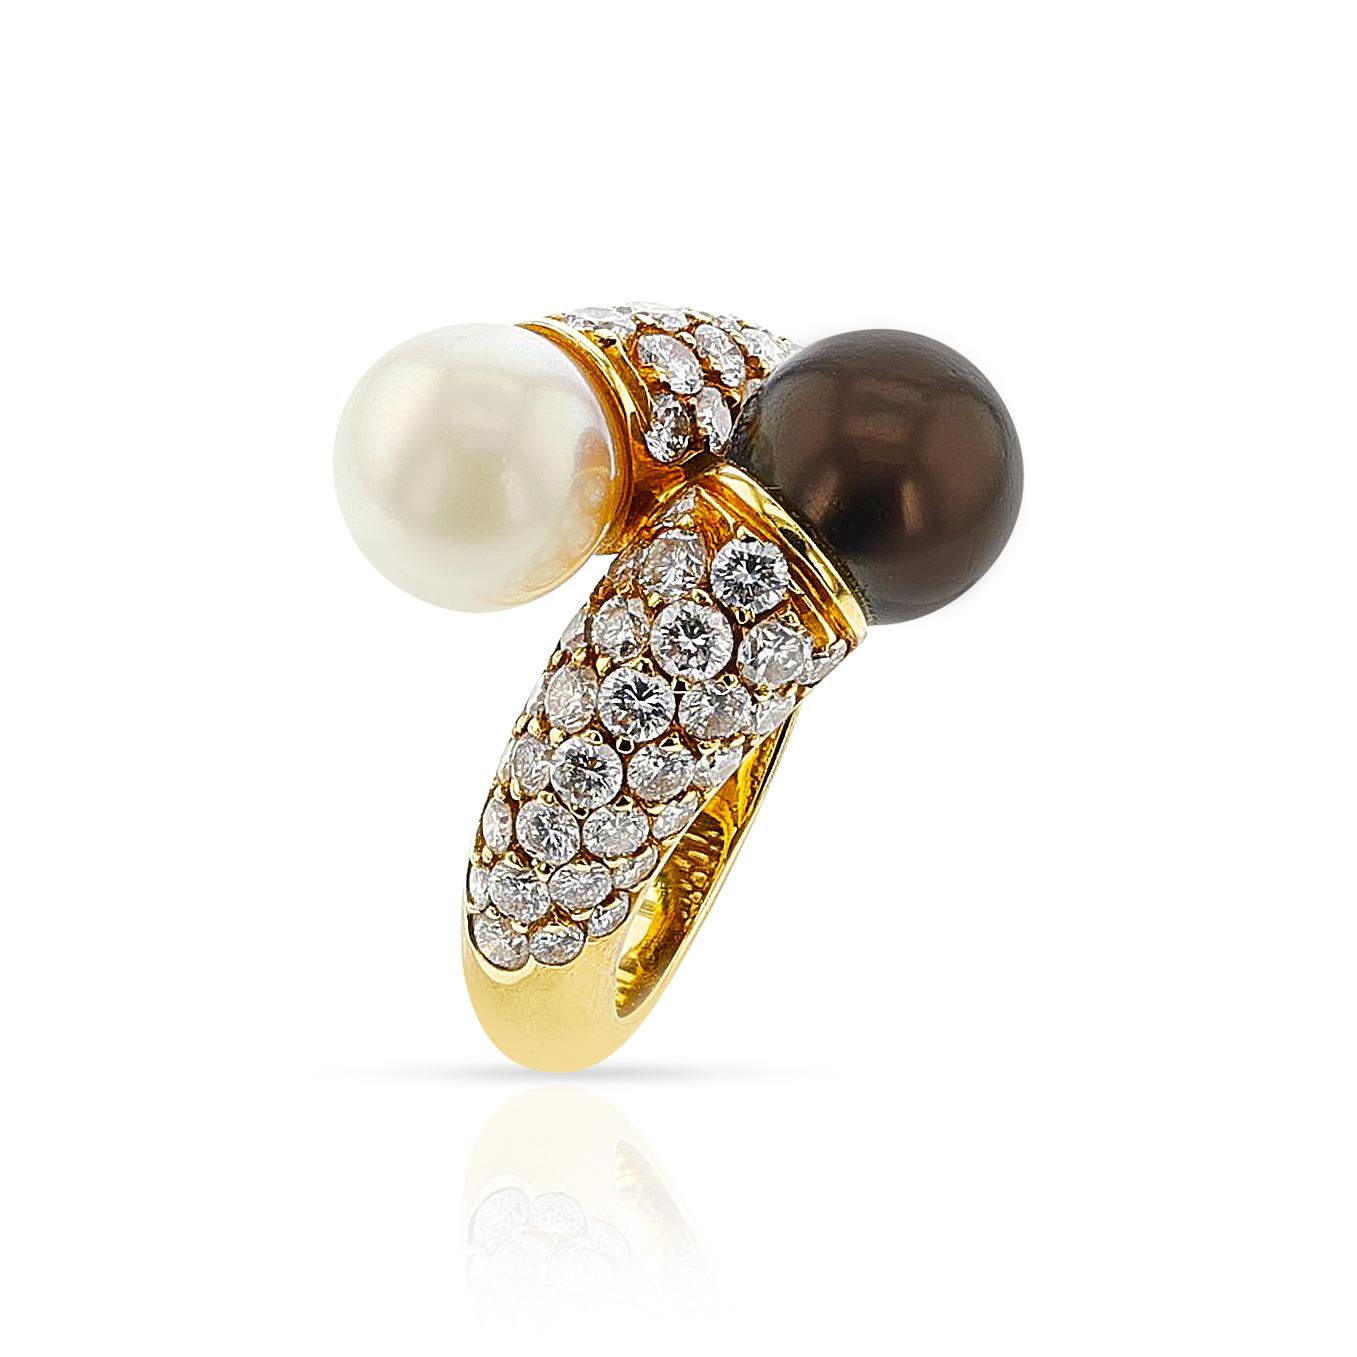 Van Cleef & Arpels Toi Et Moi Pearl Ring with Diamonds, 18k For Sale 2